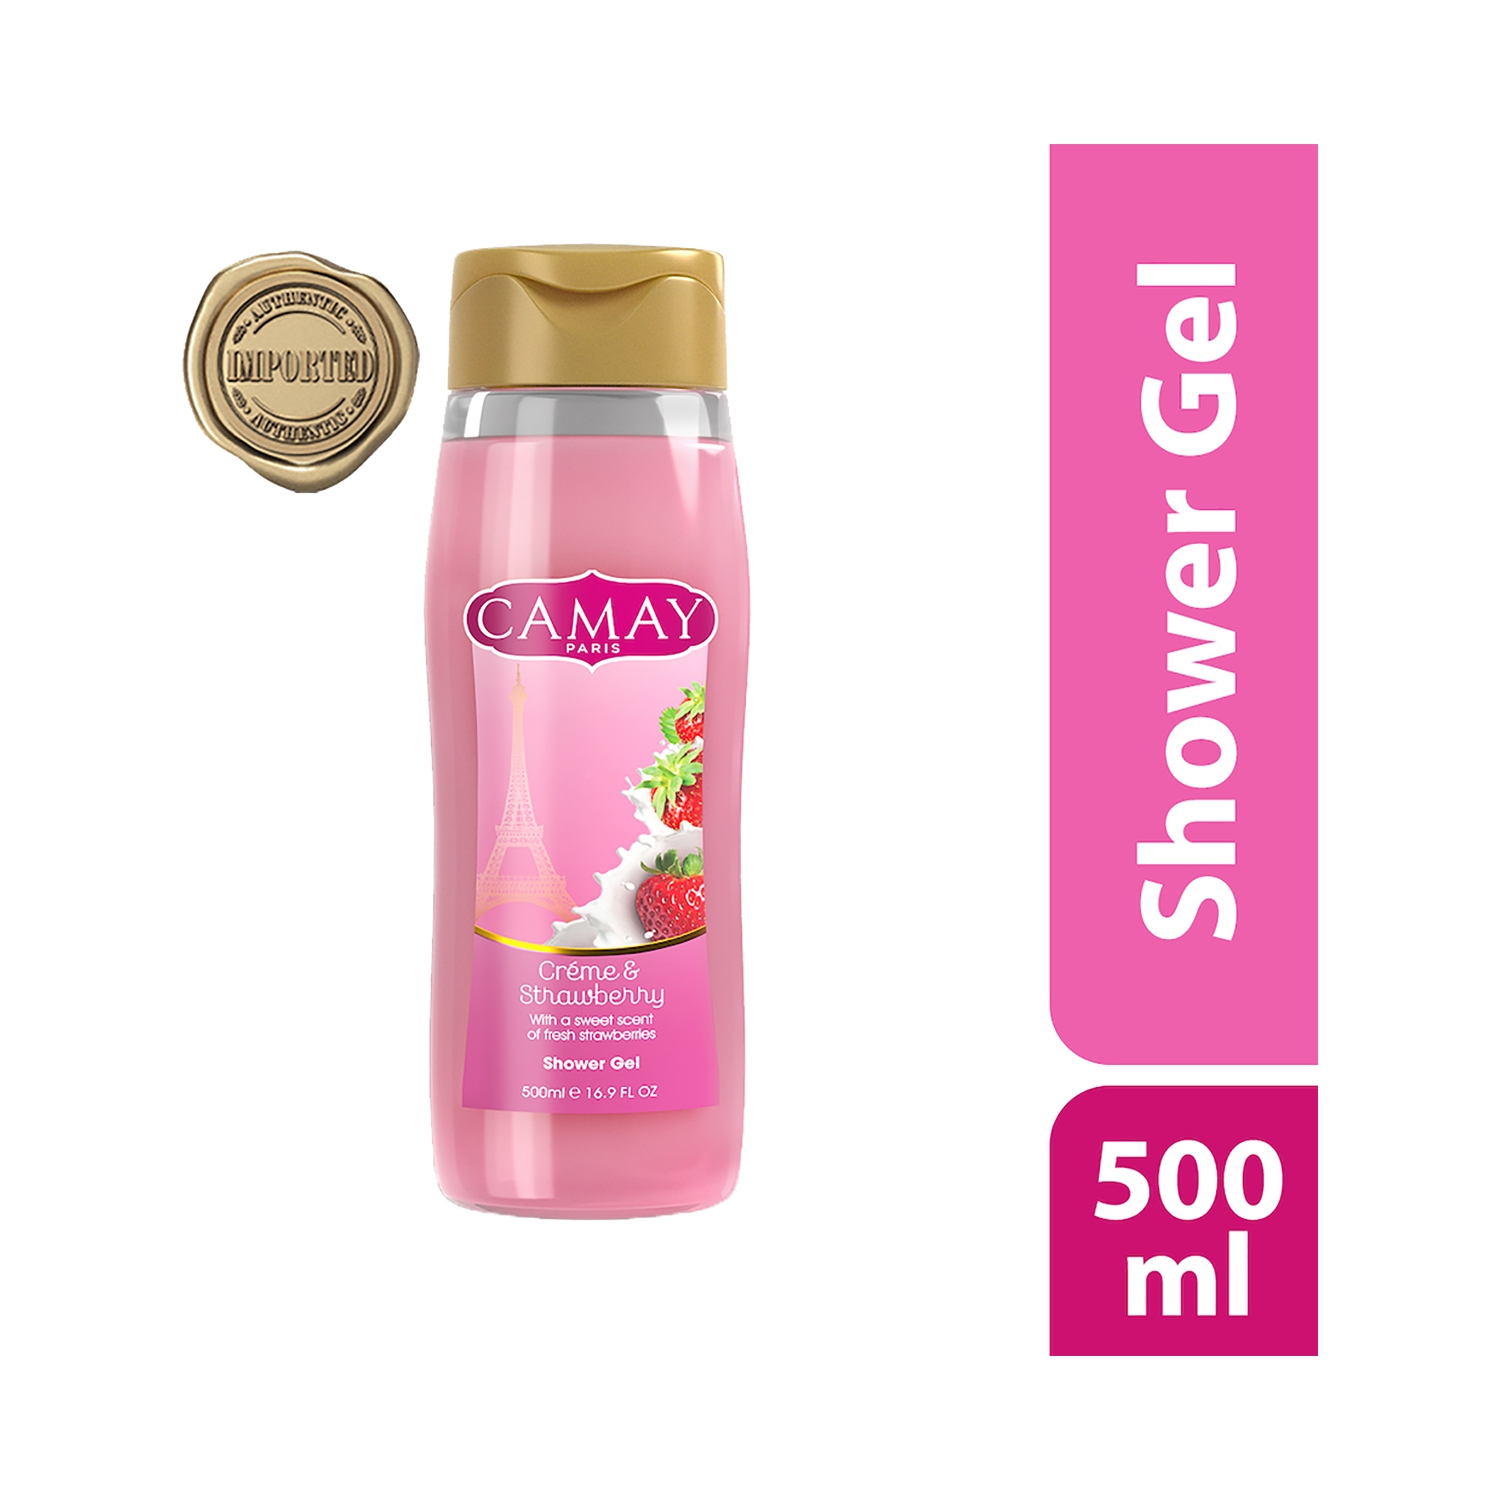 Camay | Camay Paris Creme & Strawberry Shower Gel with Natural Oils (500ml)